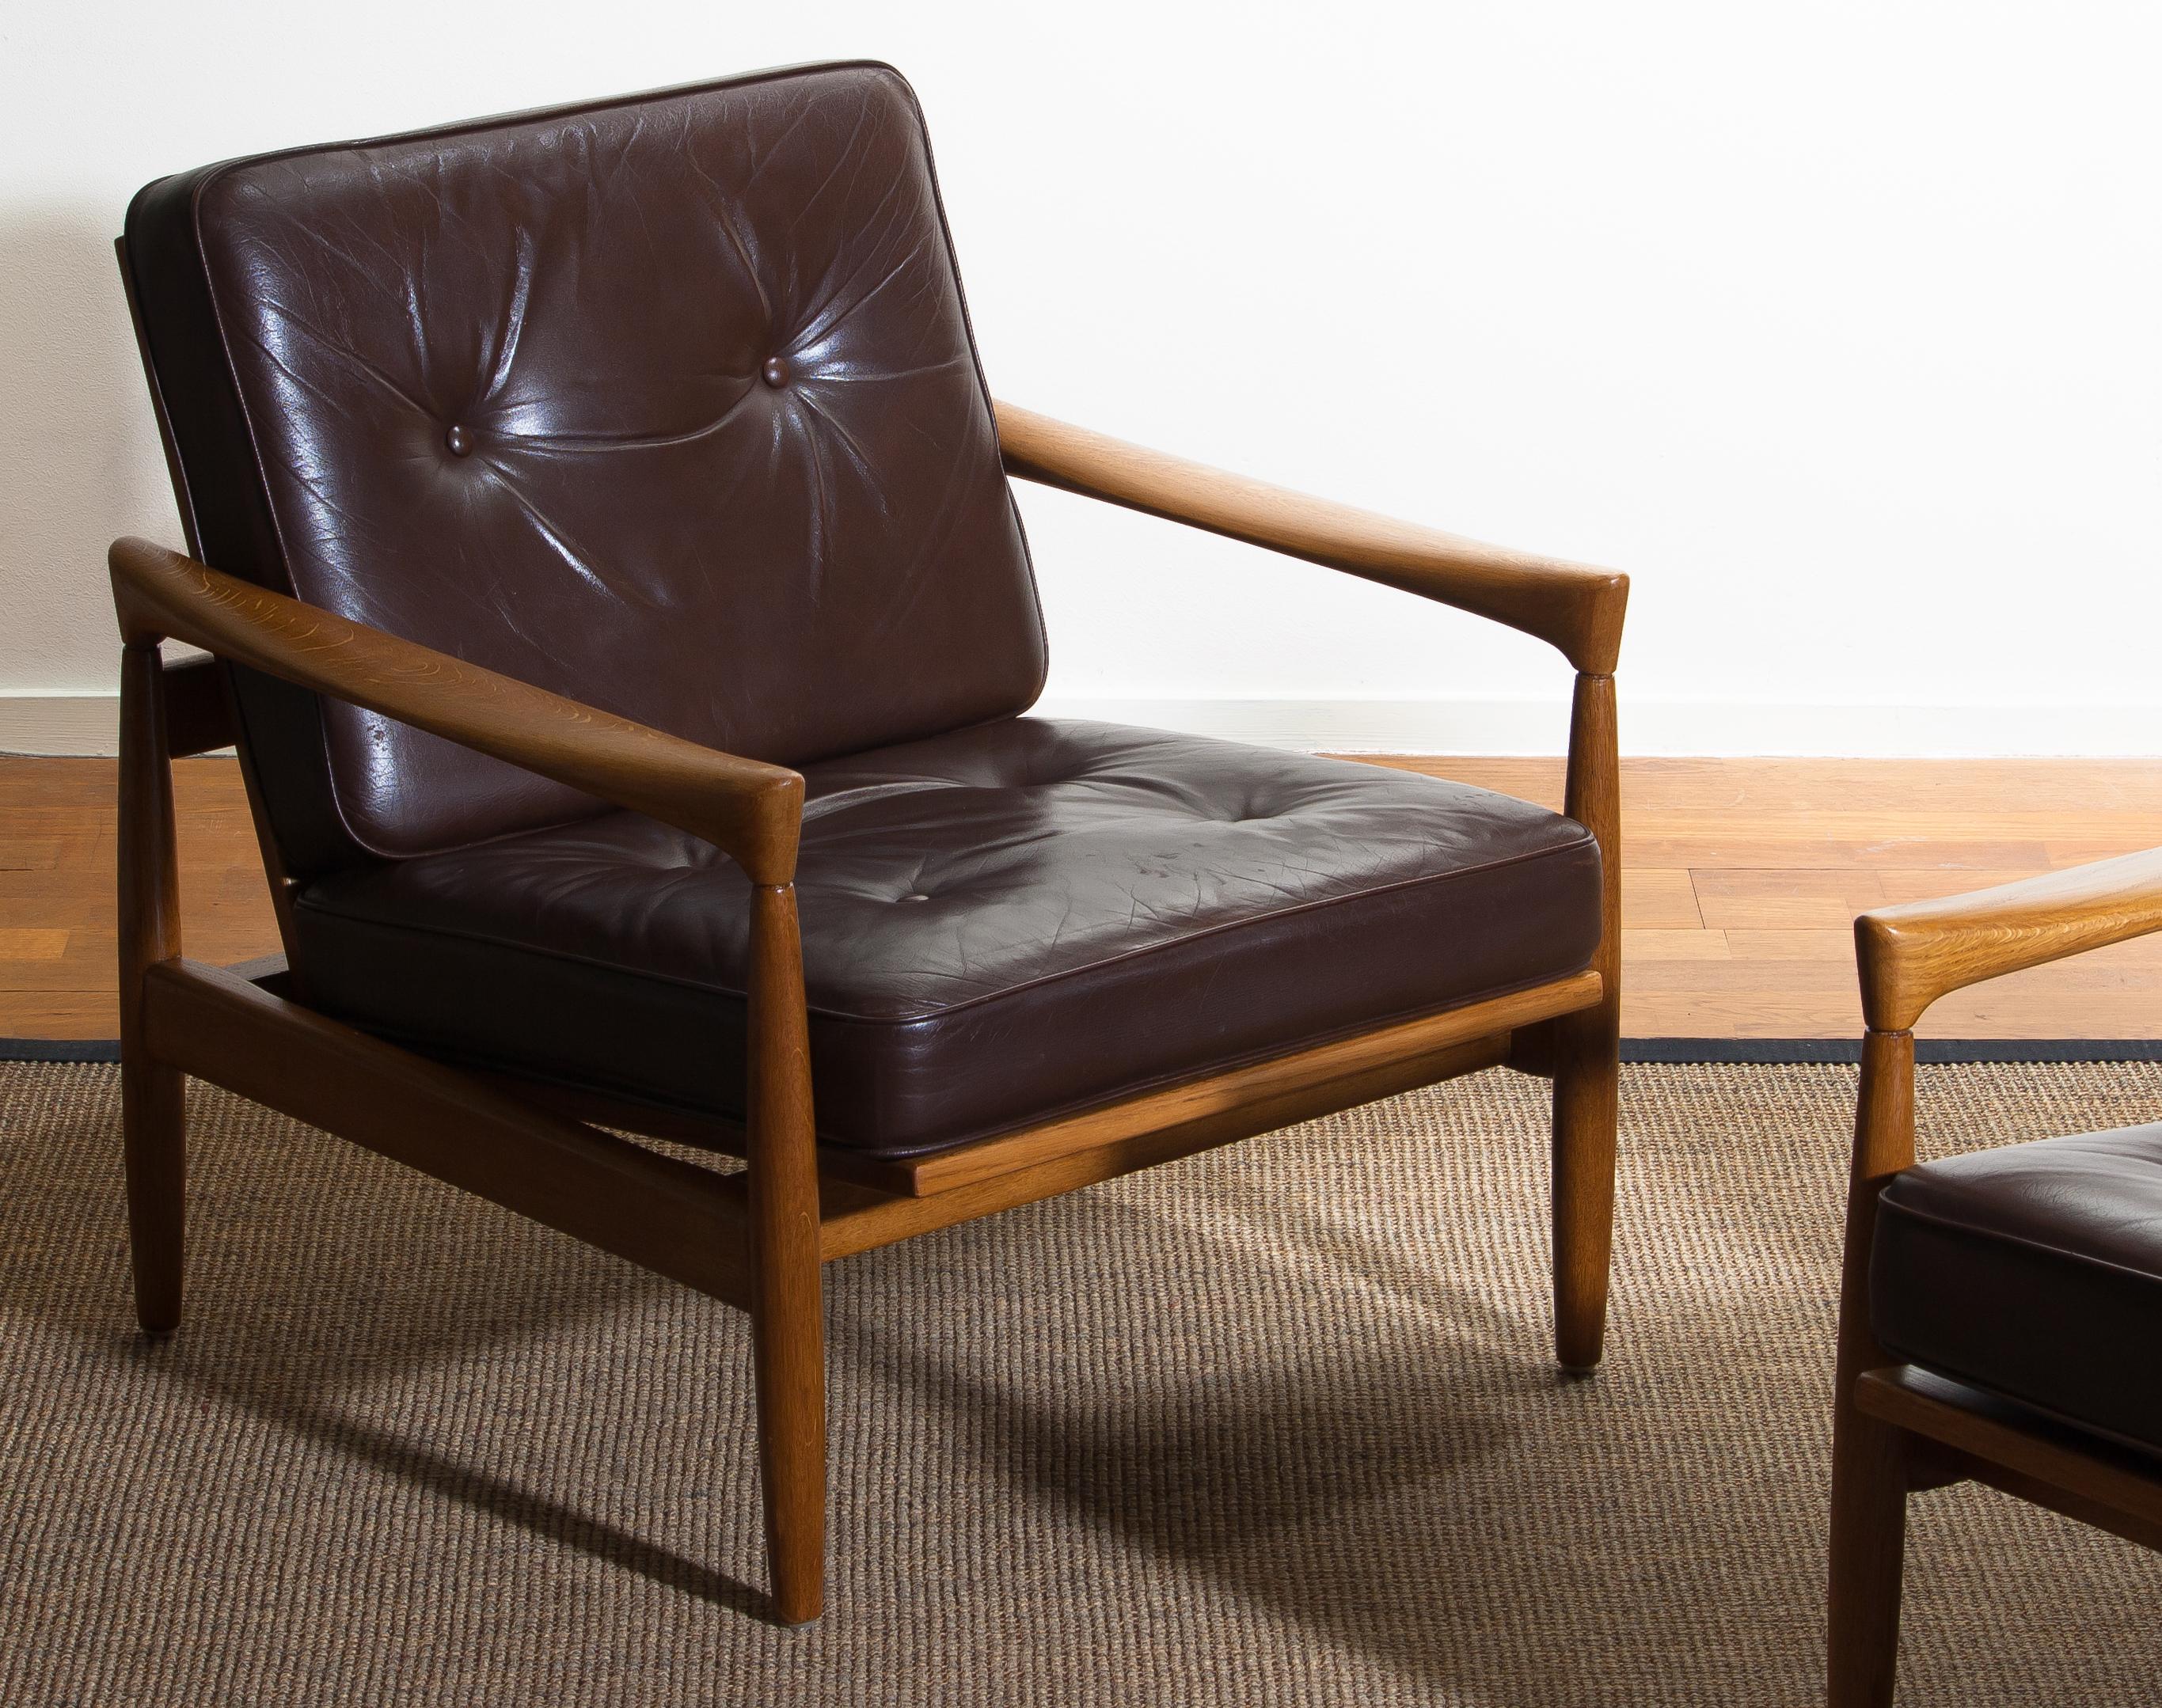 1960s, Set of Two Oak and Brown Leather Easy or Lounge Chairs by Erik Wörtz (Schwedisch)